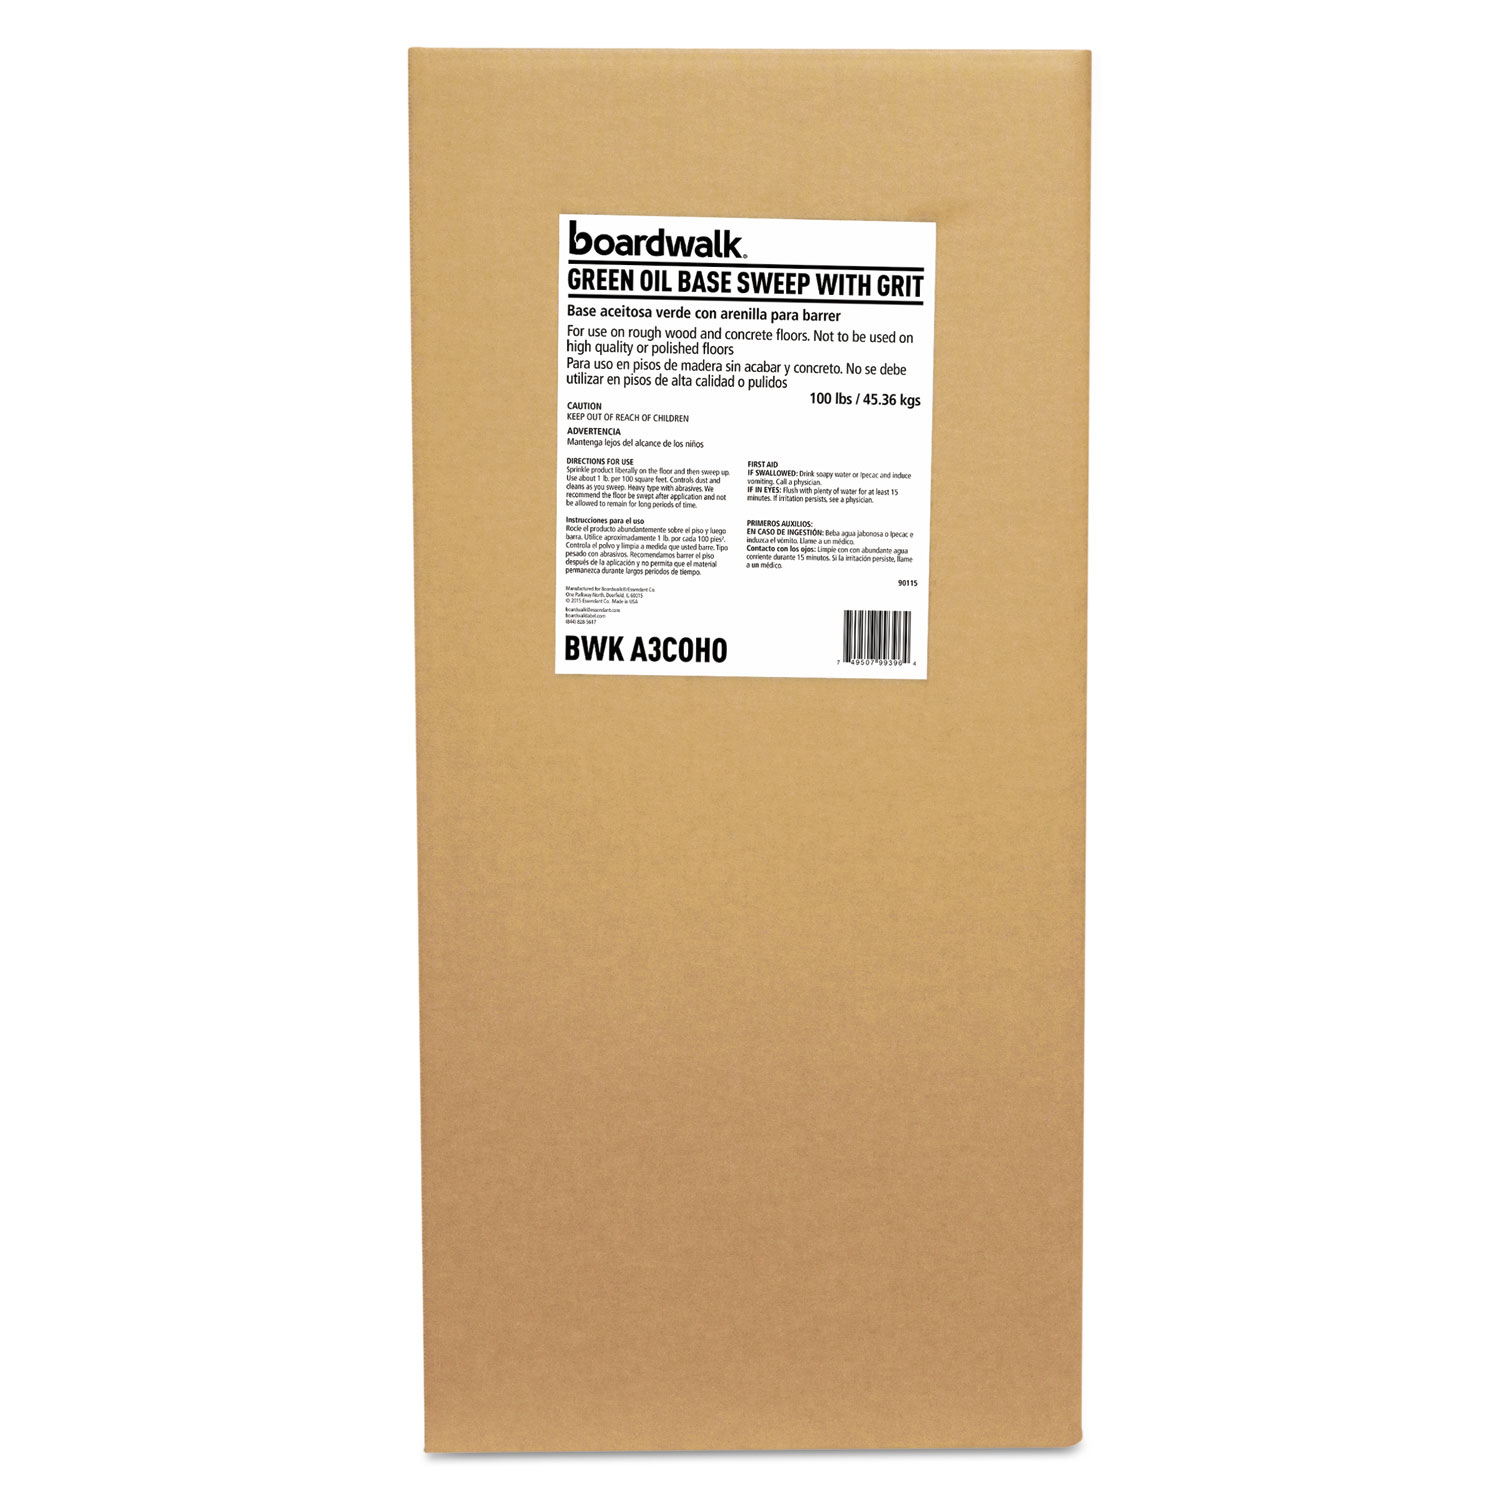 Oil-Based Sweeping Compound, Grit, Green, 100lbs, Box